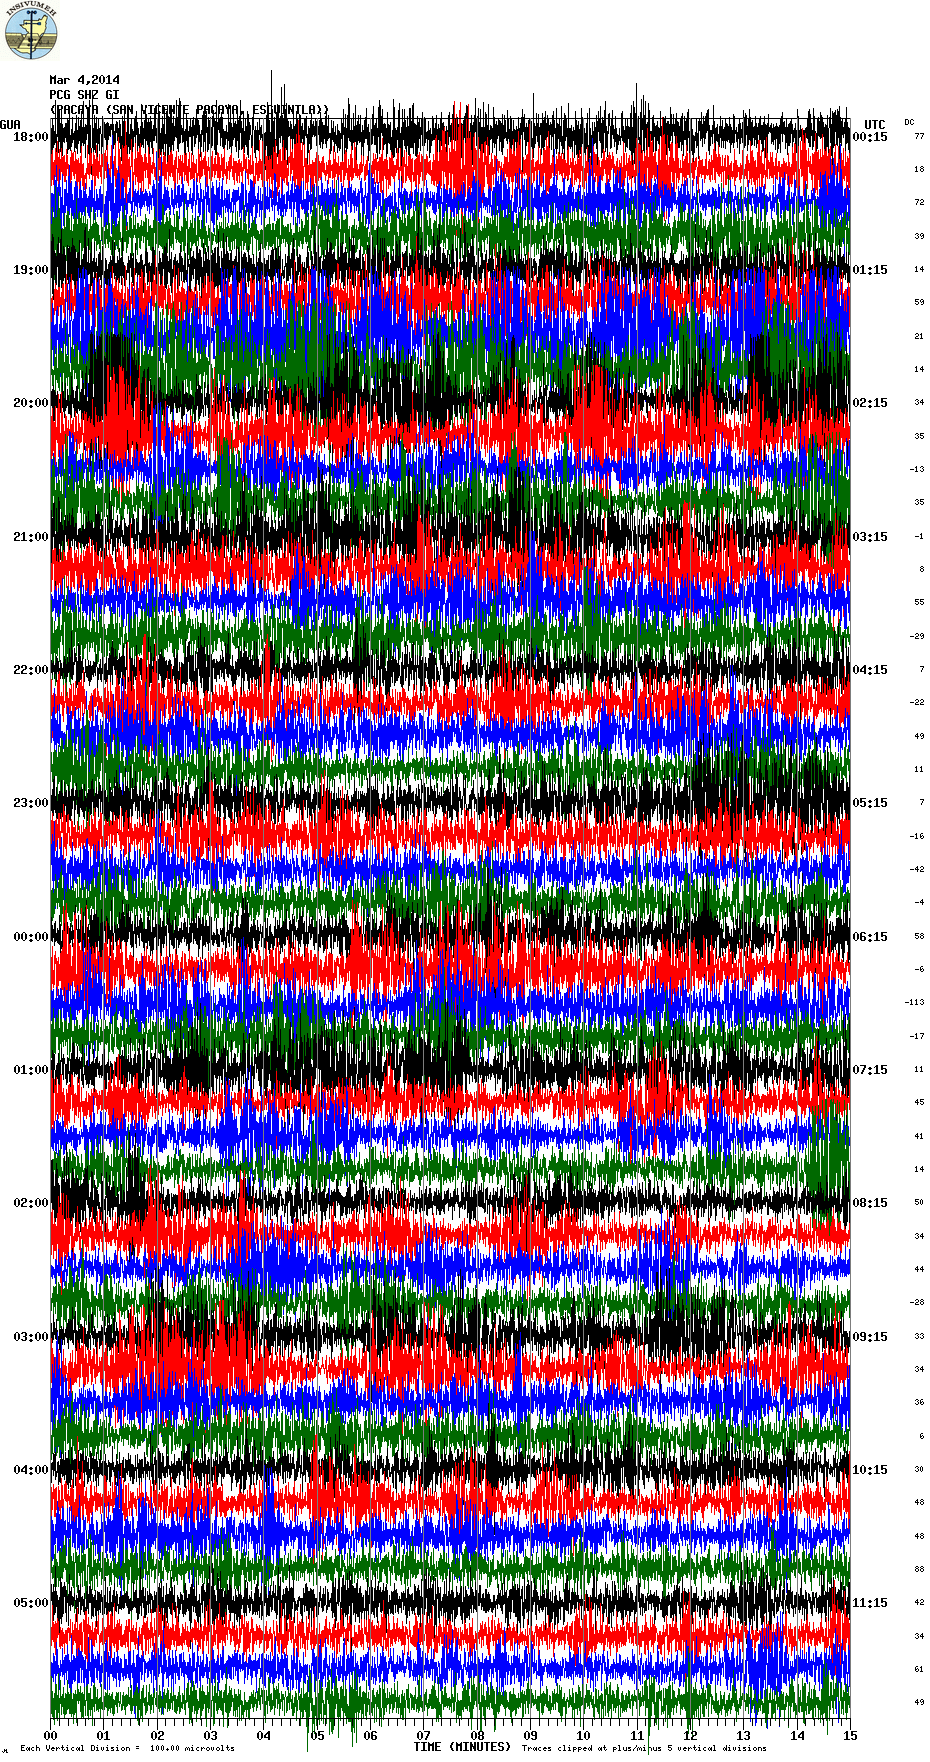 This morning's seismic signal from Pacaya (PCG station, INSIVUMEH)